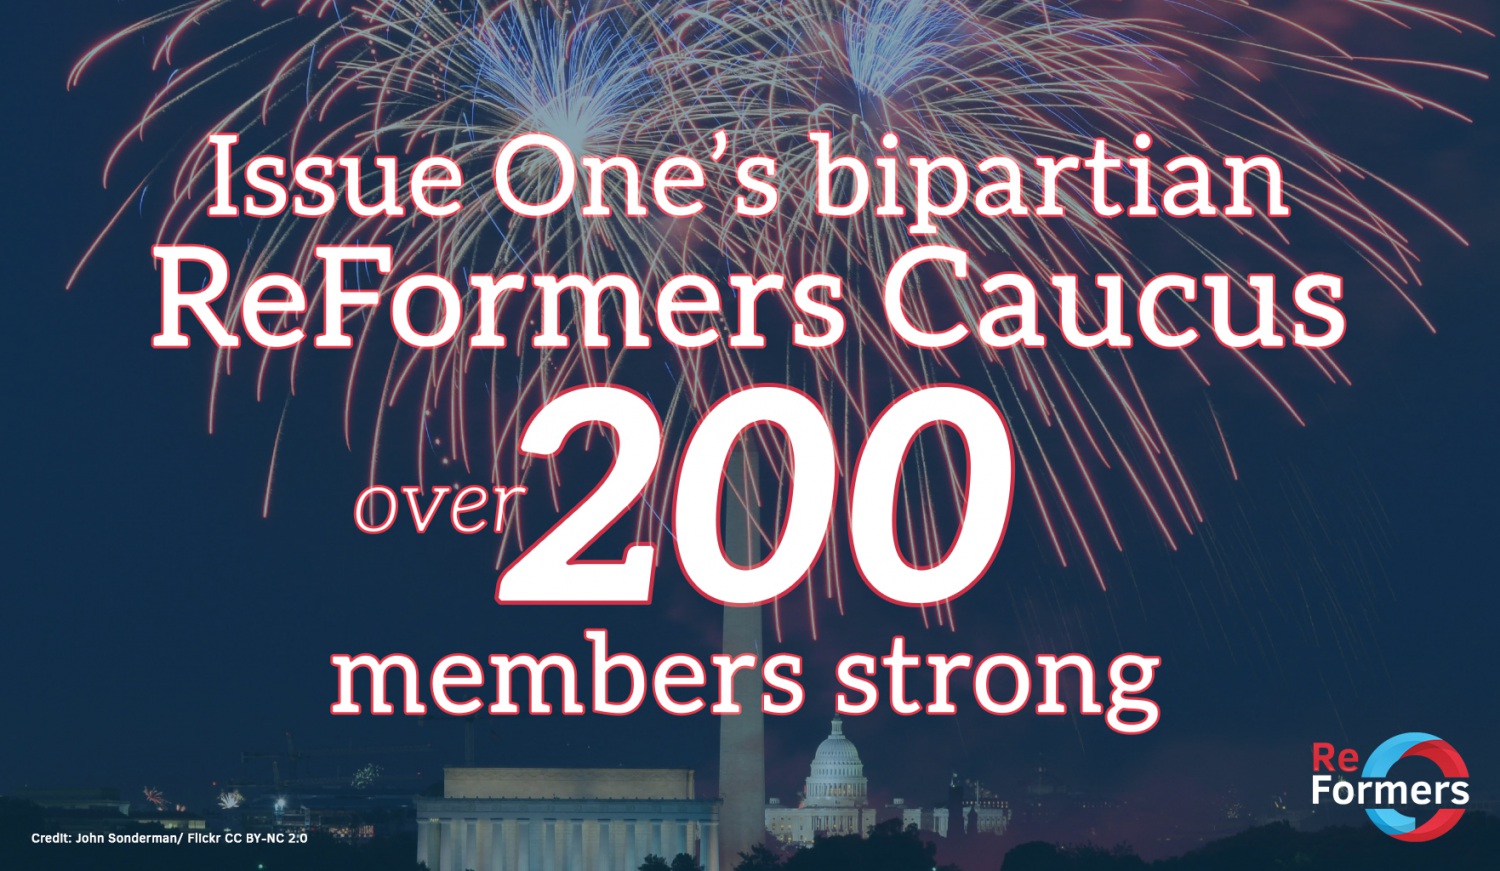  (Issue One recruits more than 200 ReFormers Caucus members)